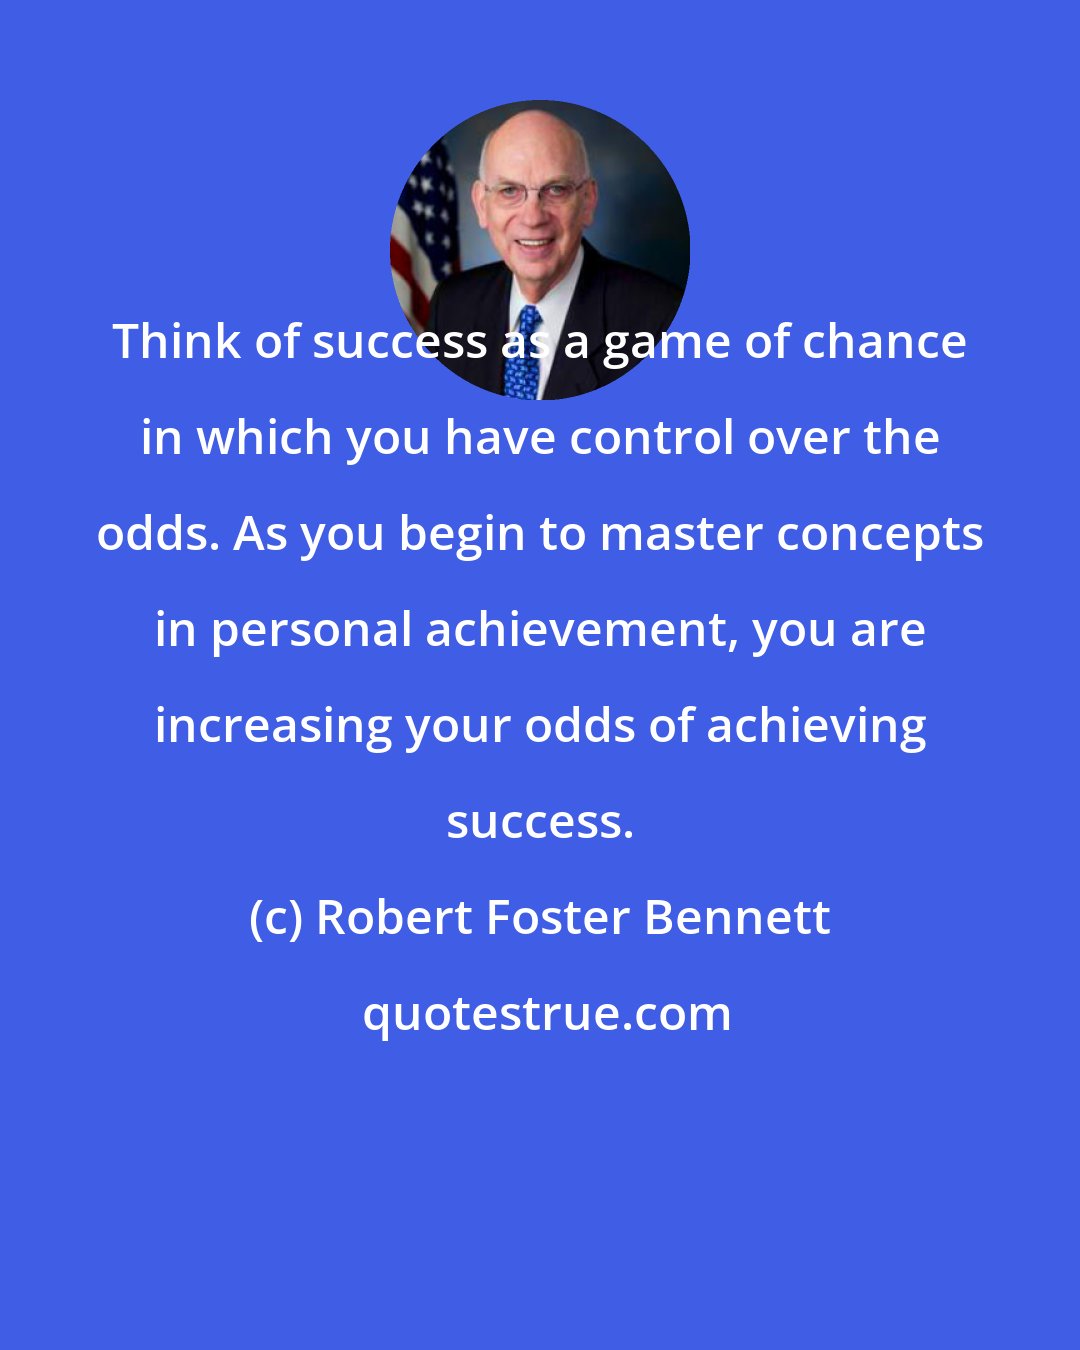 Robert Foster Bennett: Think of success as a game of chance in which you have control over the odds. As you begin to master concepts in personal achievement, you are increasing your odds of achieving success.